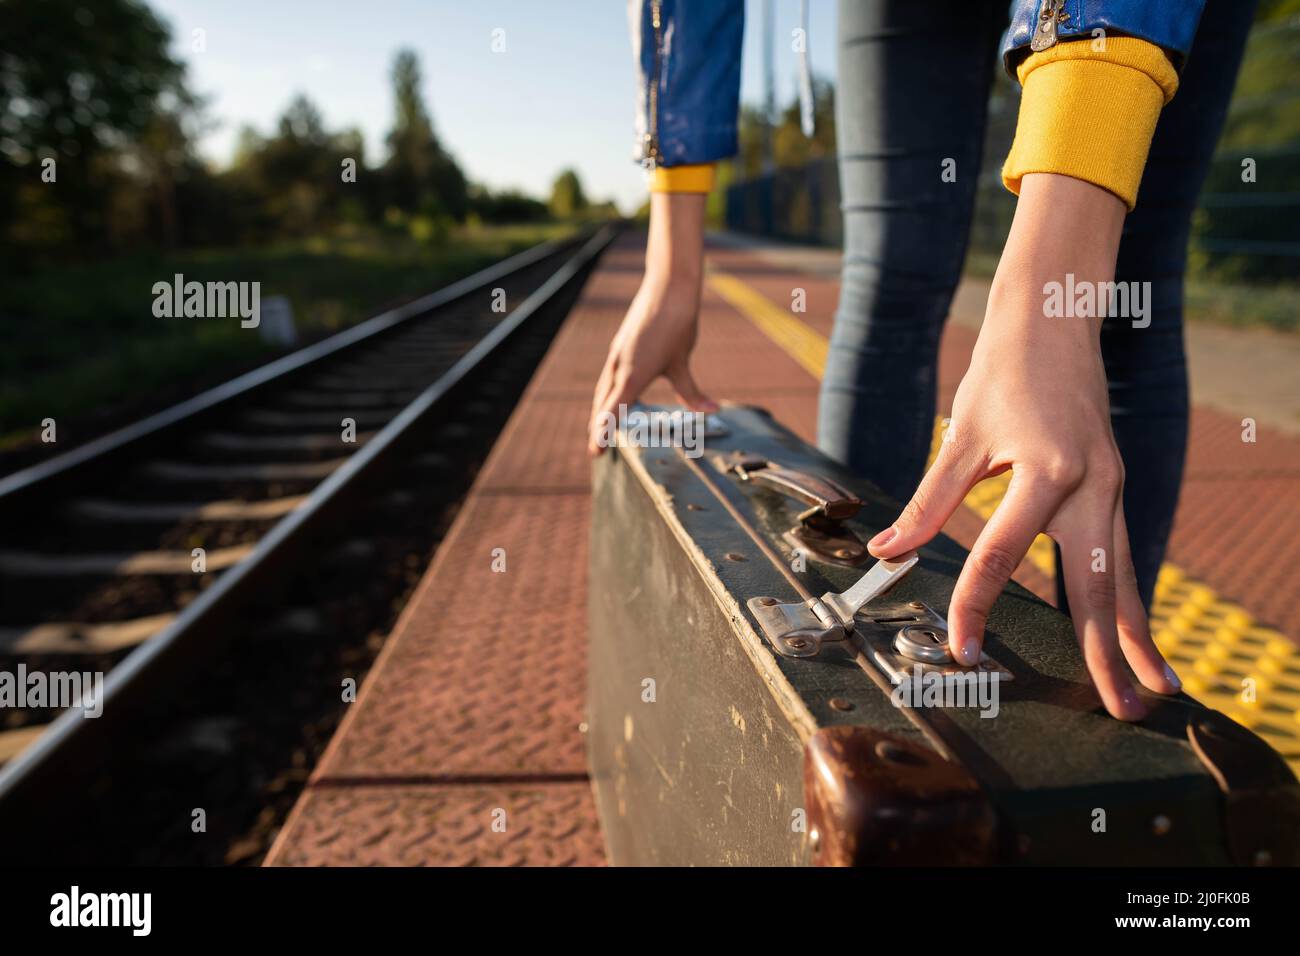 A girl fastens the zipper on an old travel suitcase on a train platform one summer afternoon during a planned train trip. Stock Photo